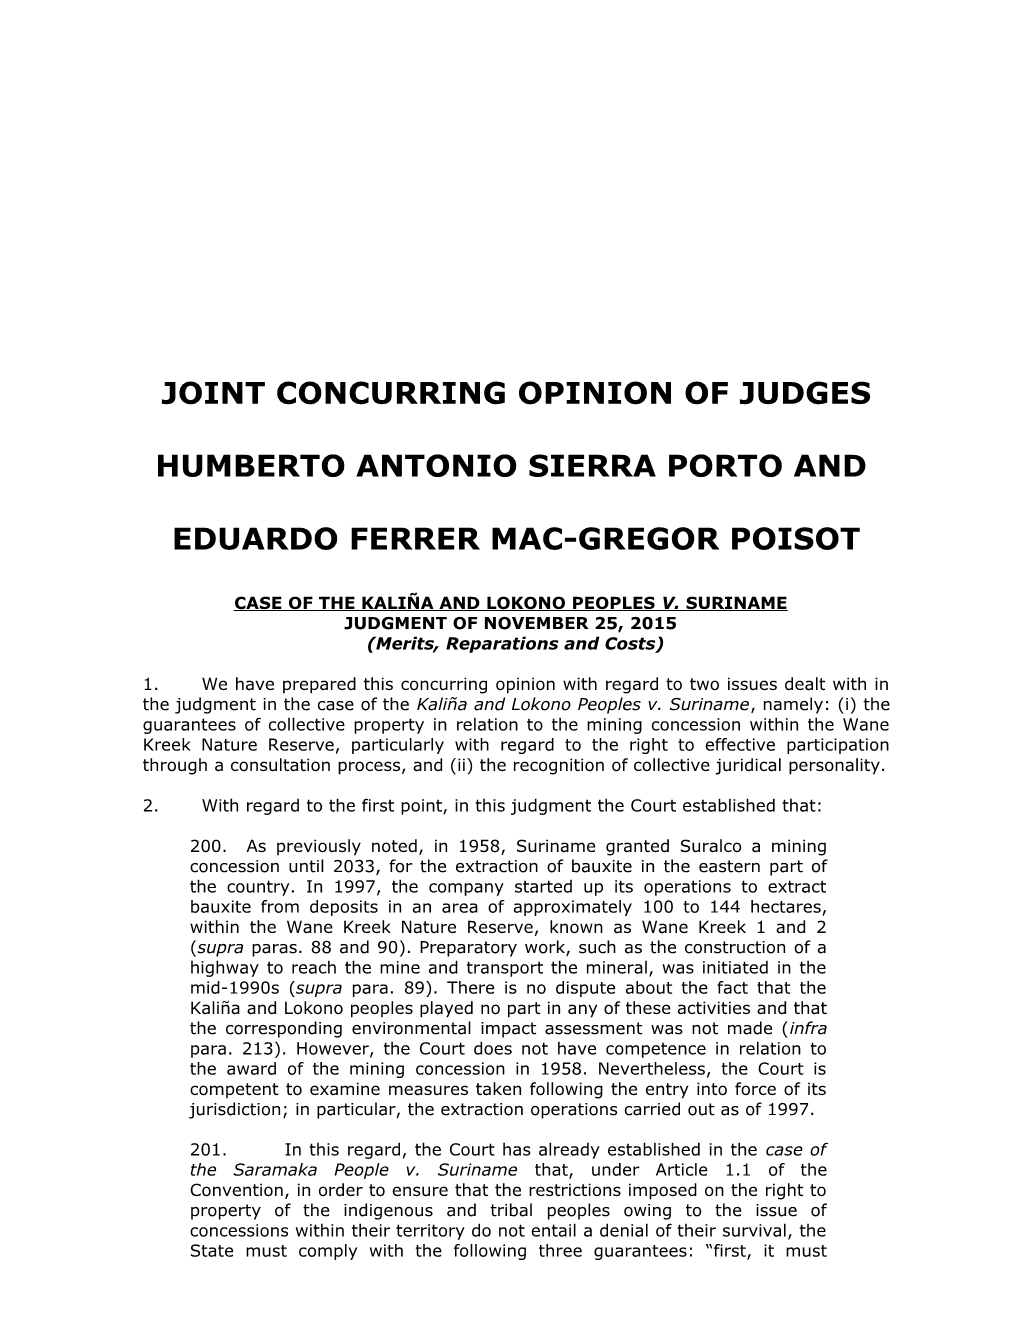 Joint Concurring Opinion of Judges